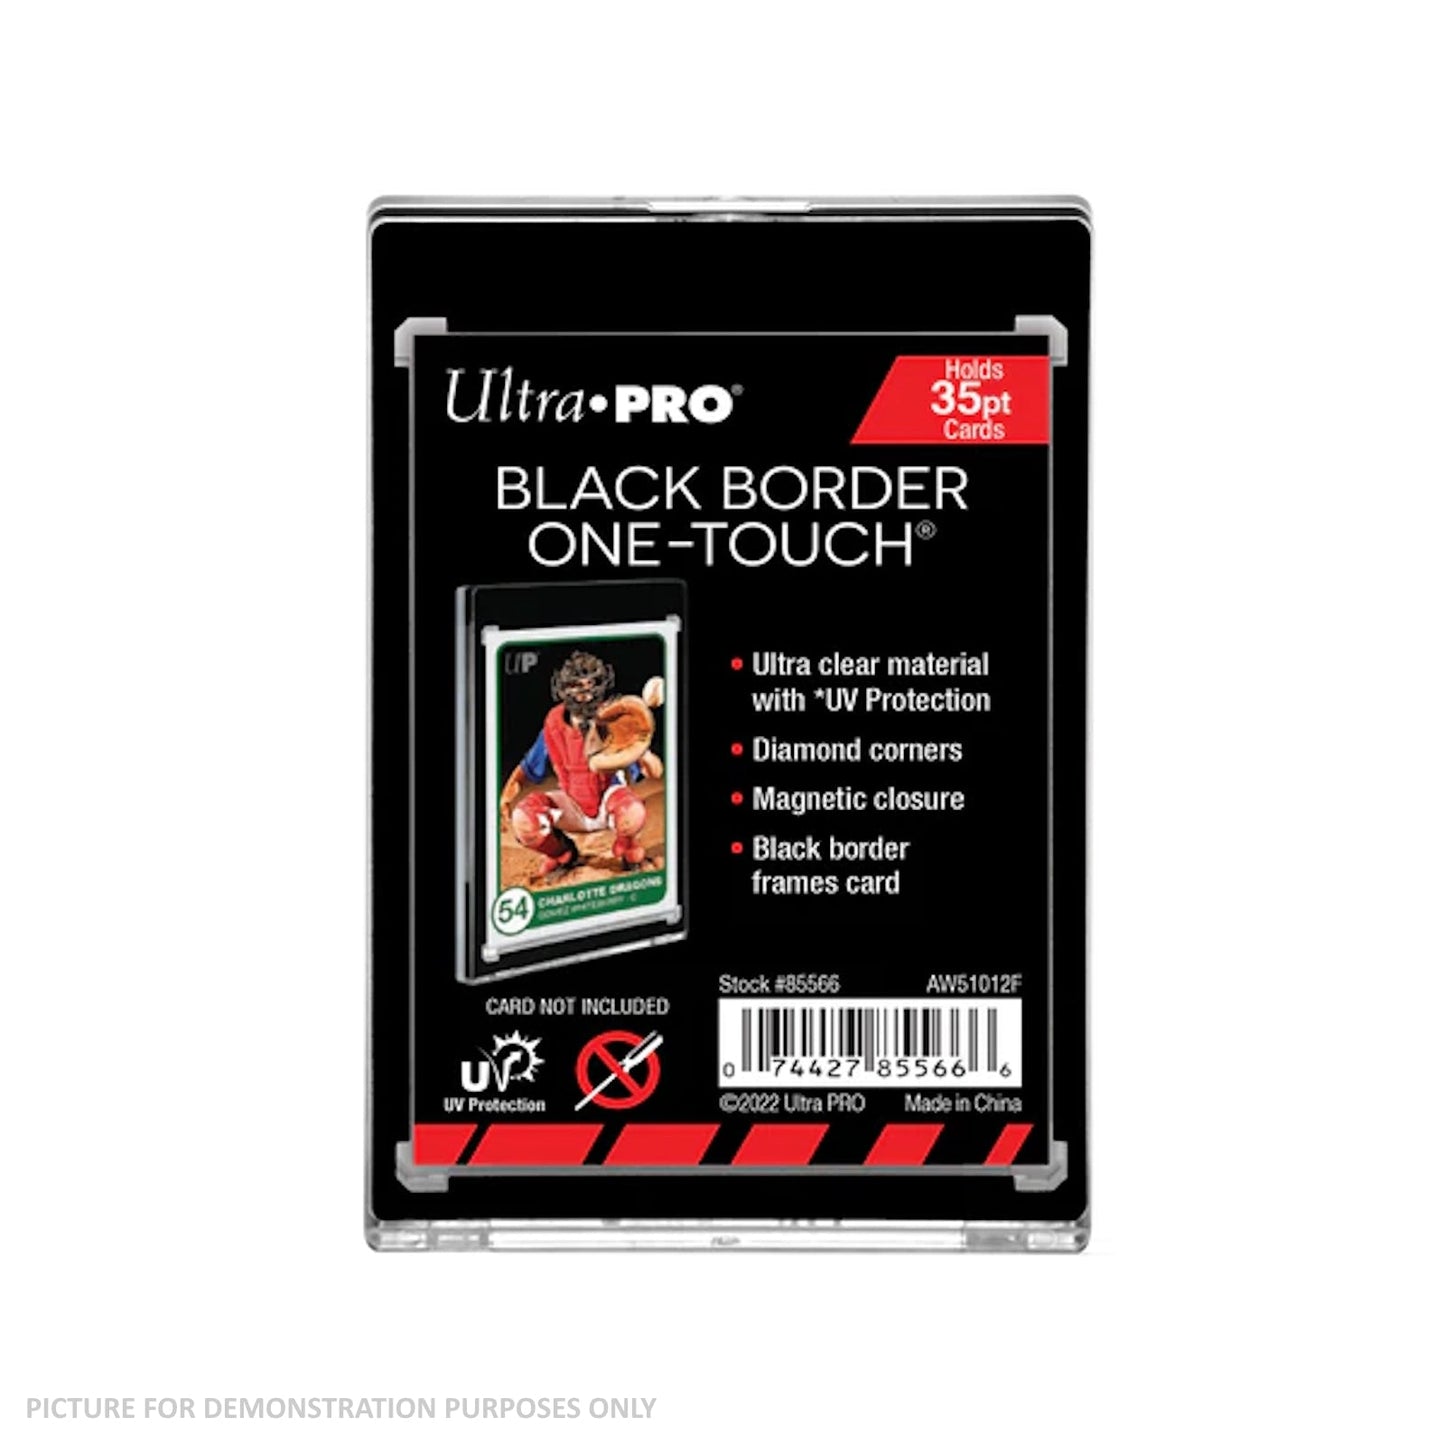 Ultra Pro One-Touch 35pt - Black Border